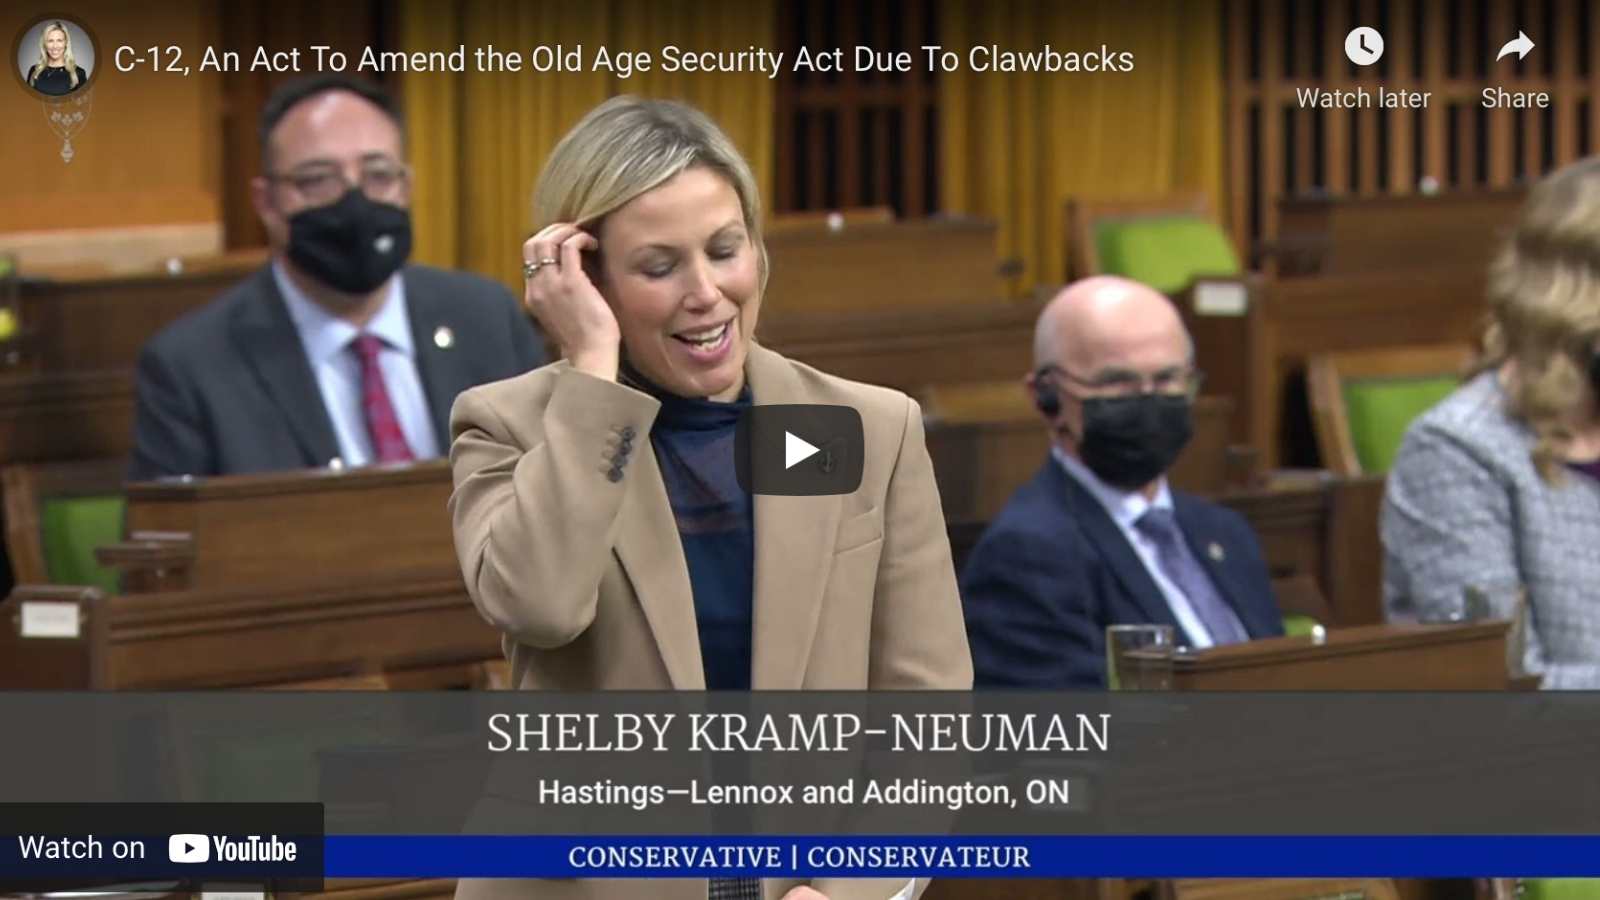 Shelby Kramp-Neuman MP standing in the House of Commons on February 14, 2022